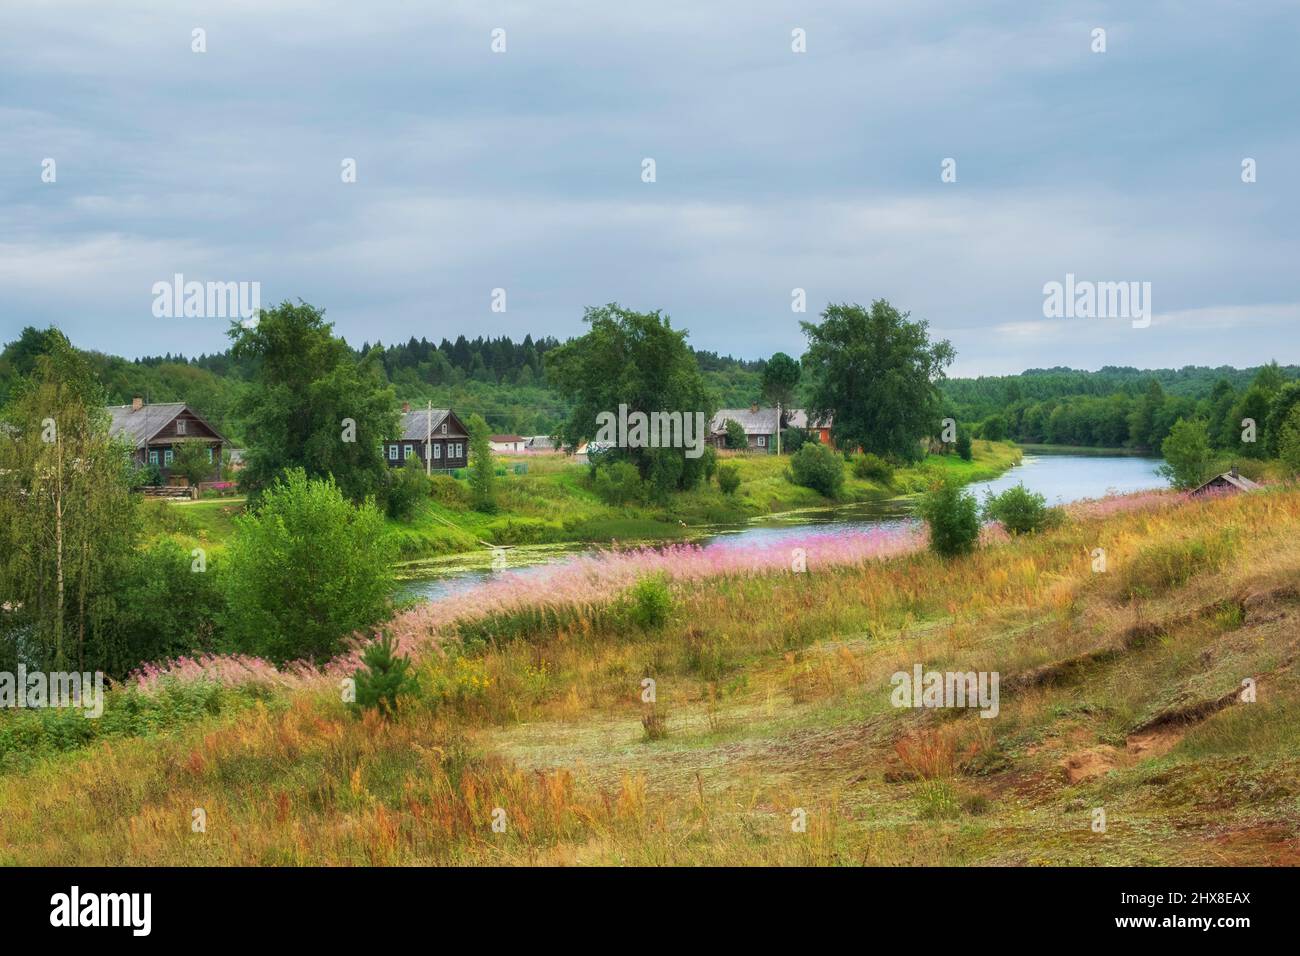 The old village of Saminsky Pogost with wooden houses on the banks of the river. Northern summer in the countryside. Vologda region, Russia Stock Photo